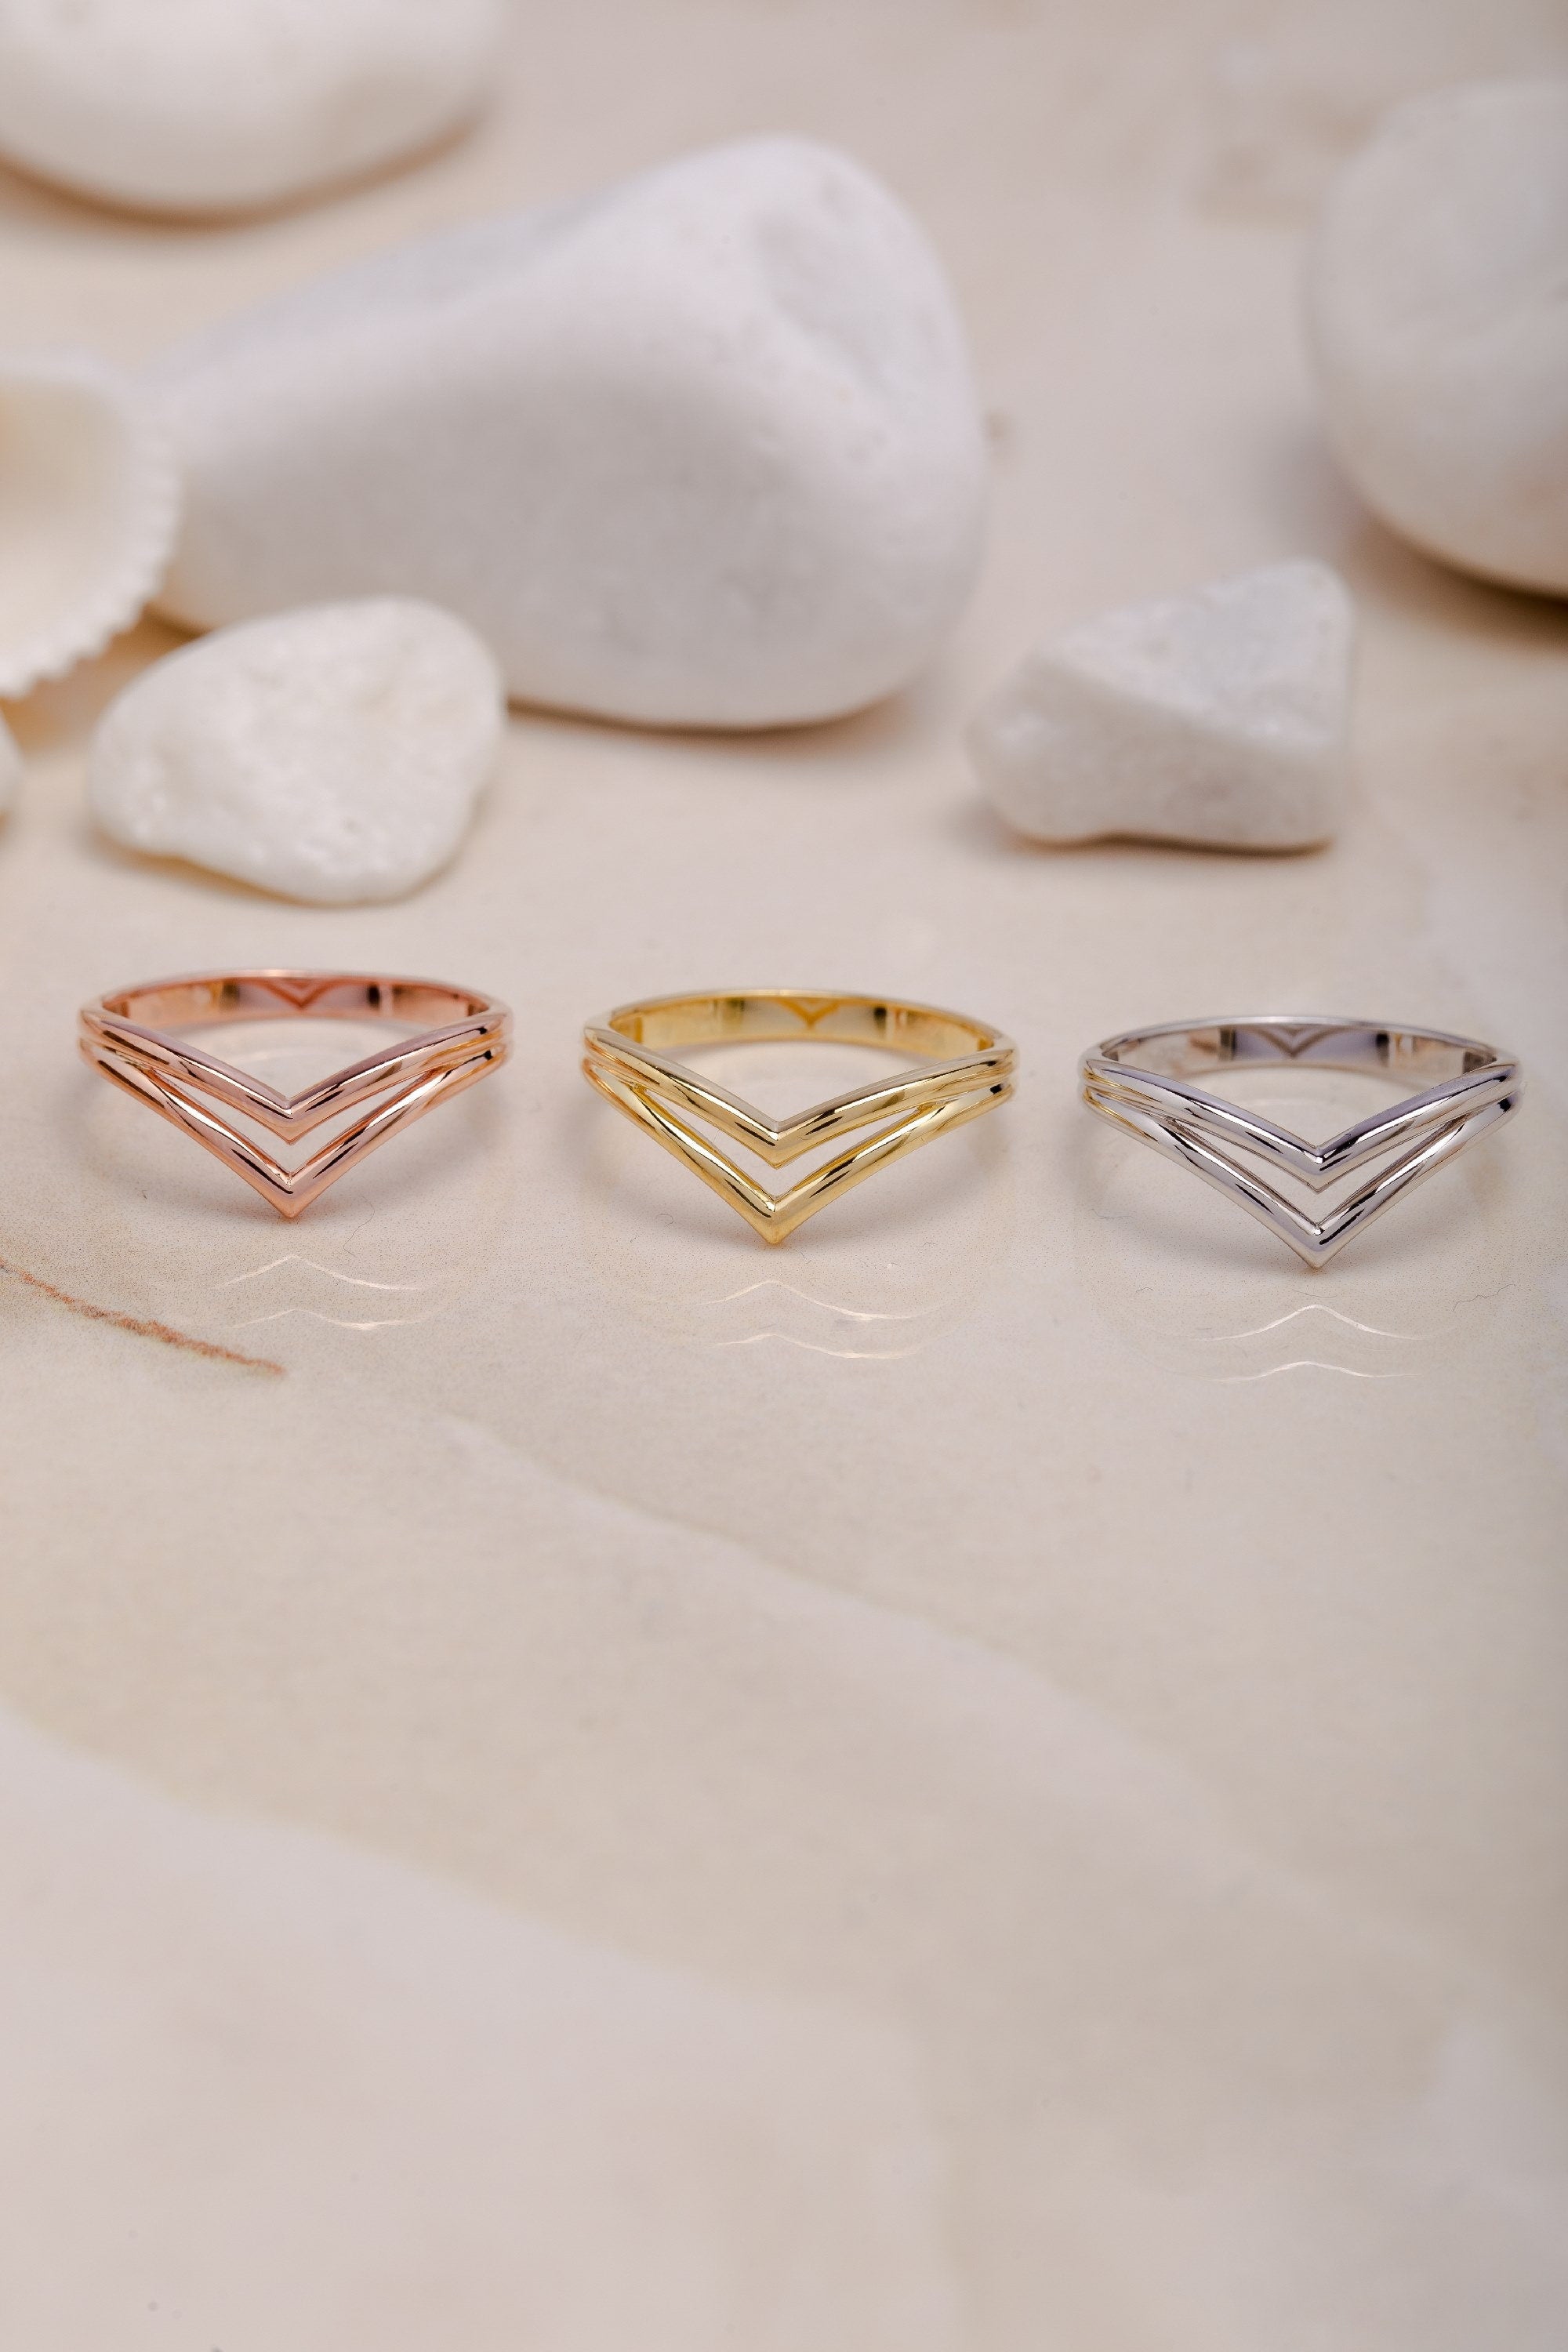 14K Chevron Ring, Gold V-Shaped Ring, Plain Stackable Ring, V Ring, Knuckle Ring, Gift For Mother Day, Mother Day Jewelry, Gift for Her